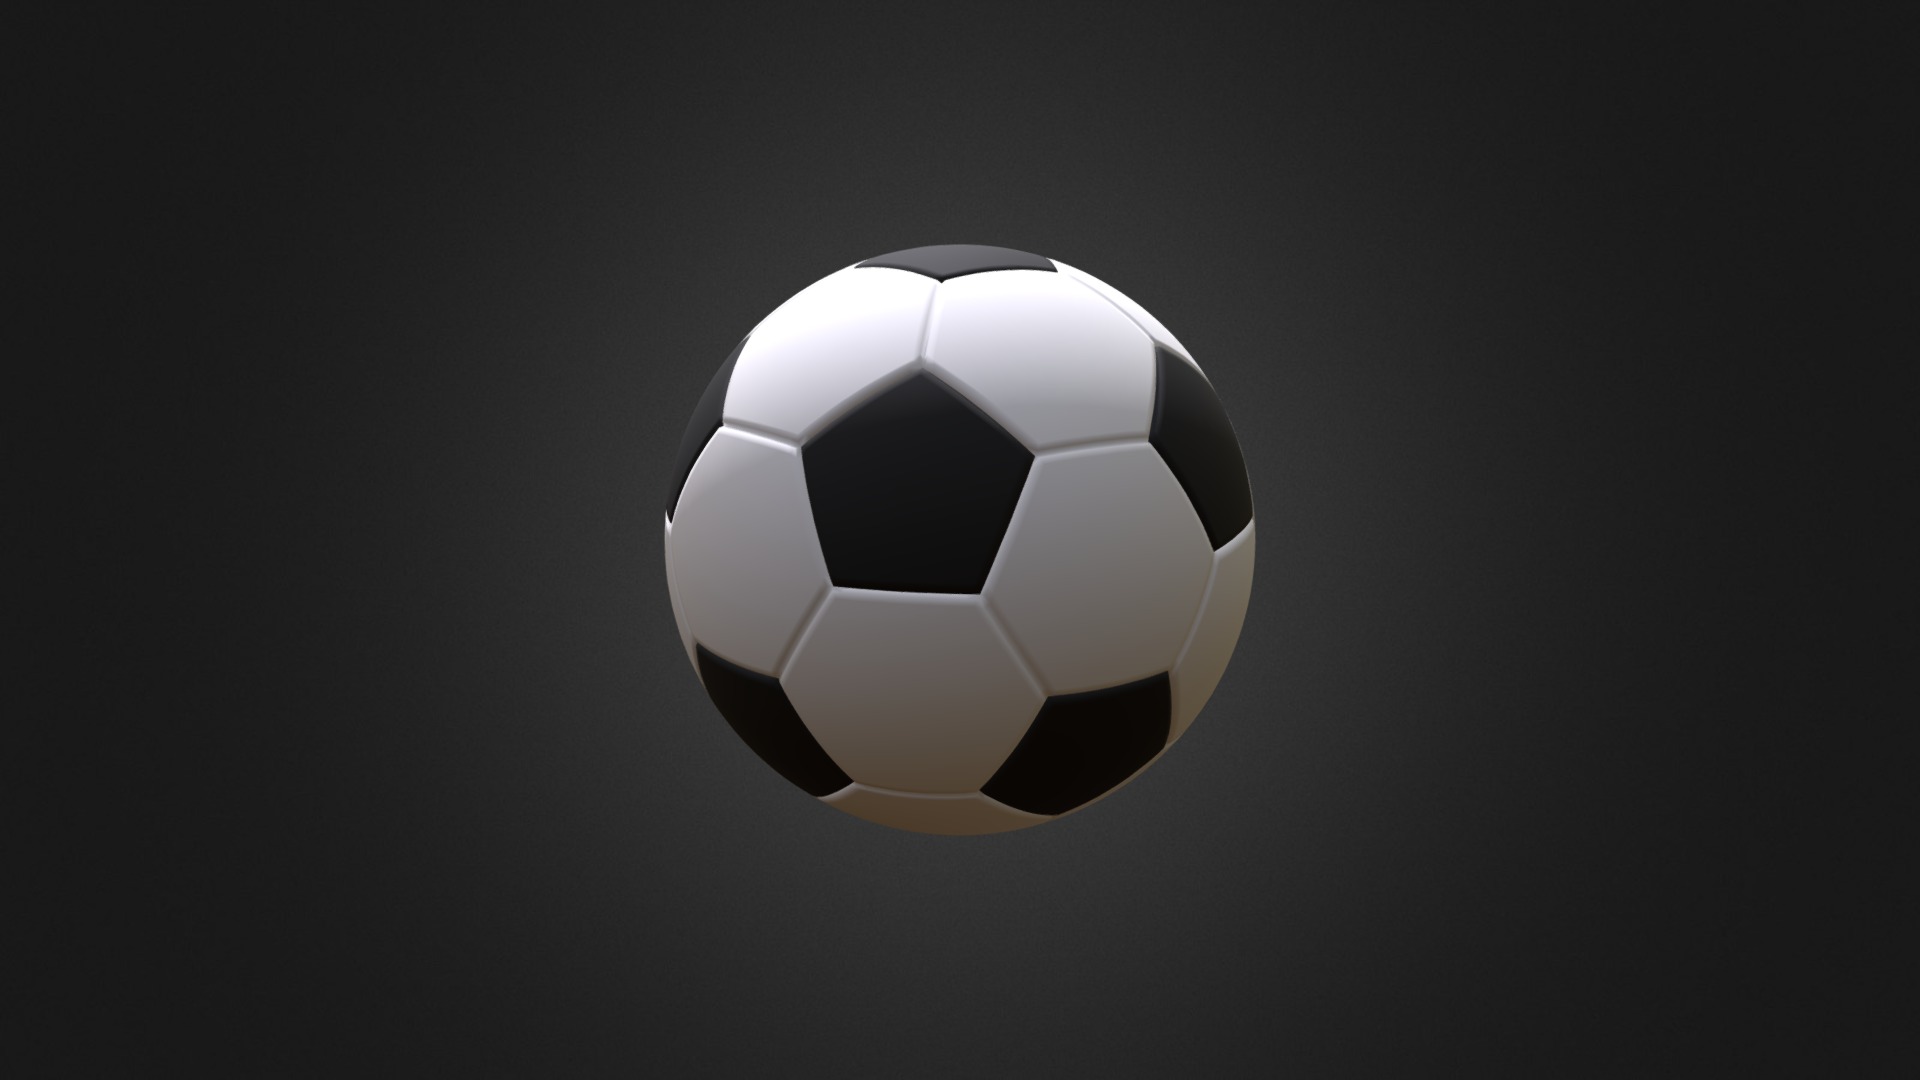 3D model Football - This is a 3D model of the Football. The 3D model is about a white football ball.